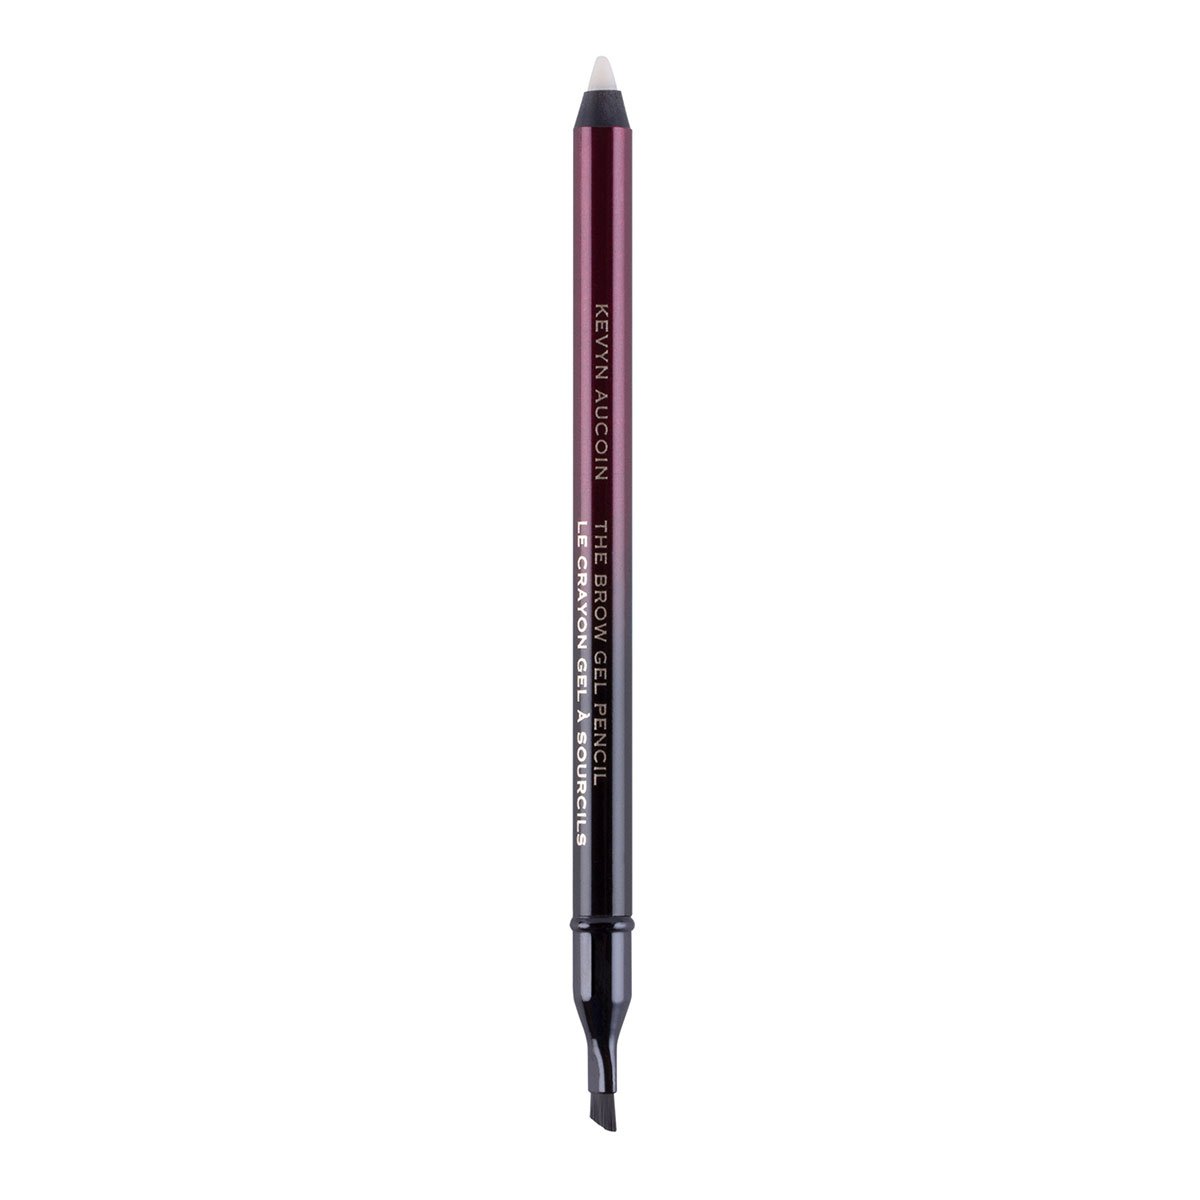 The brow gel pencil clear